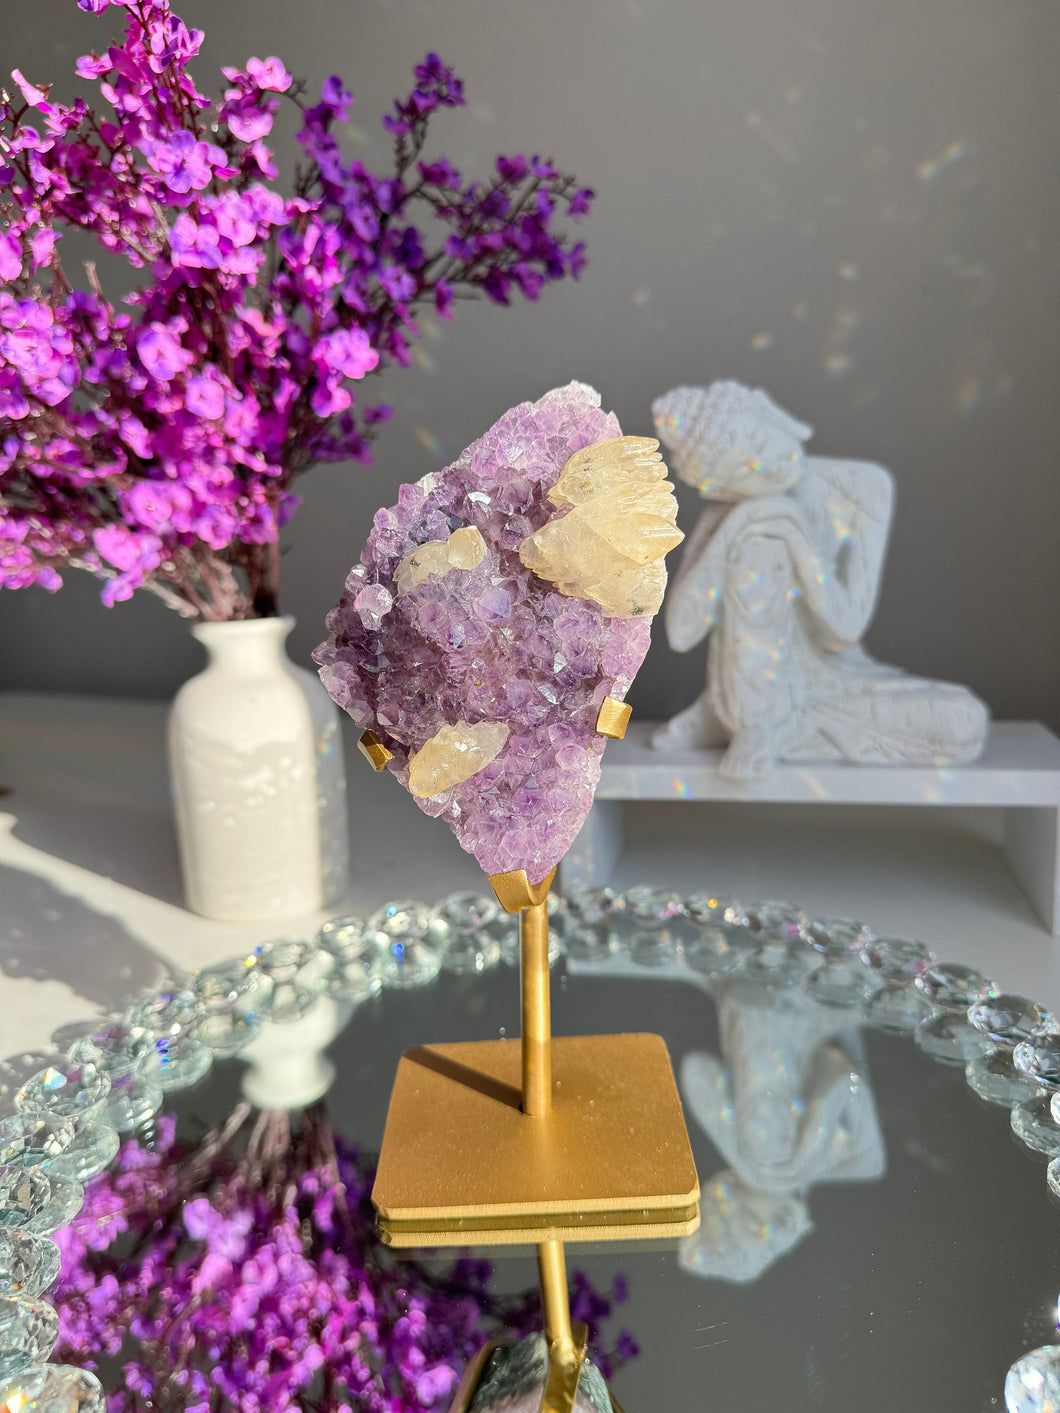 druzy amethyst geode with calcite   2655